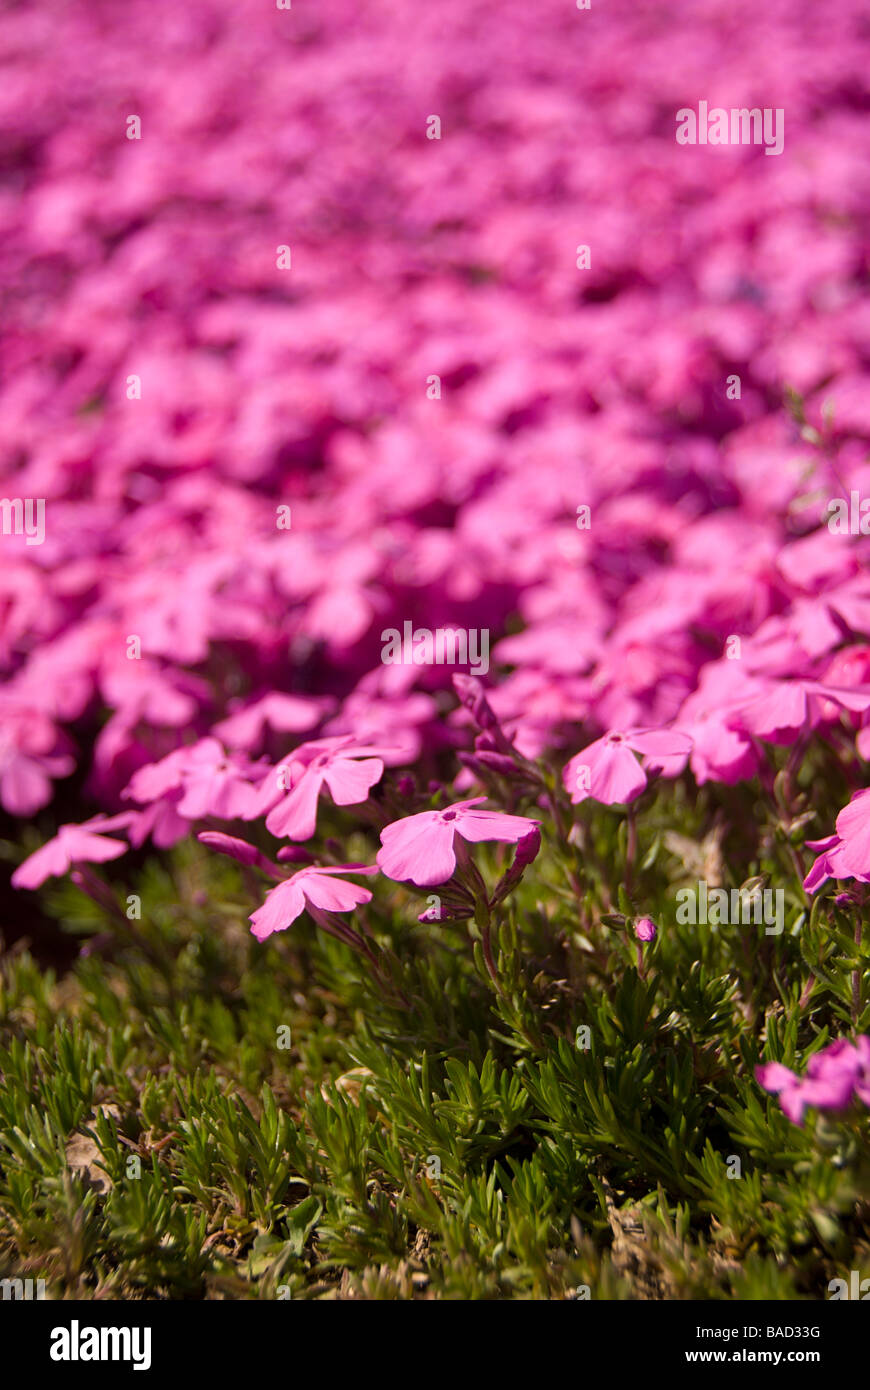 A mass planting of bright pink moss phlox Phlox subulata blooming in April in Japan's Kanto region Stock Photo